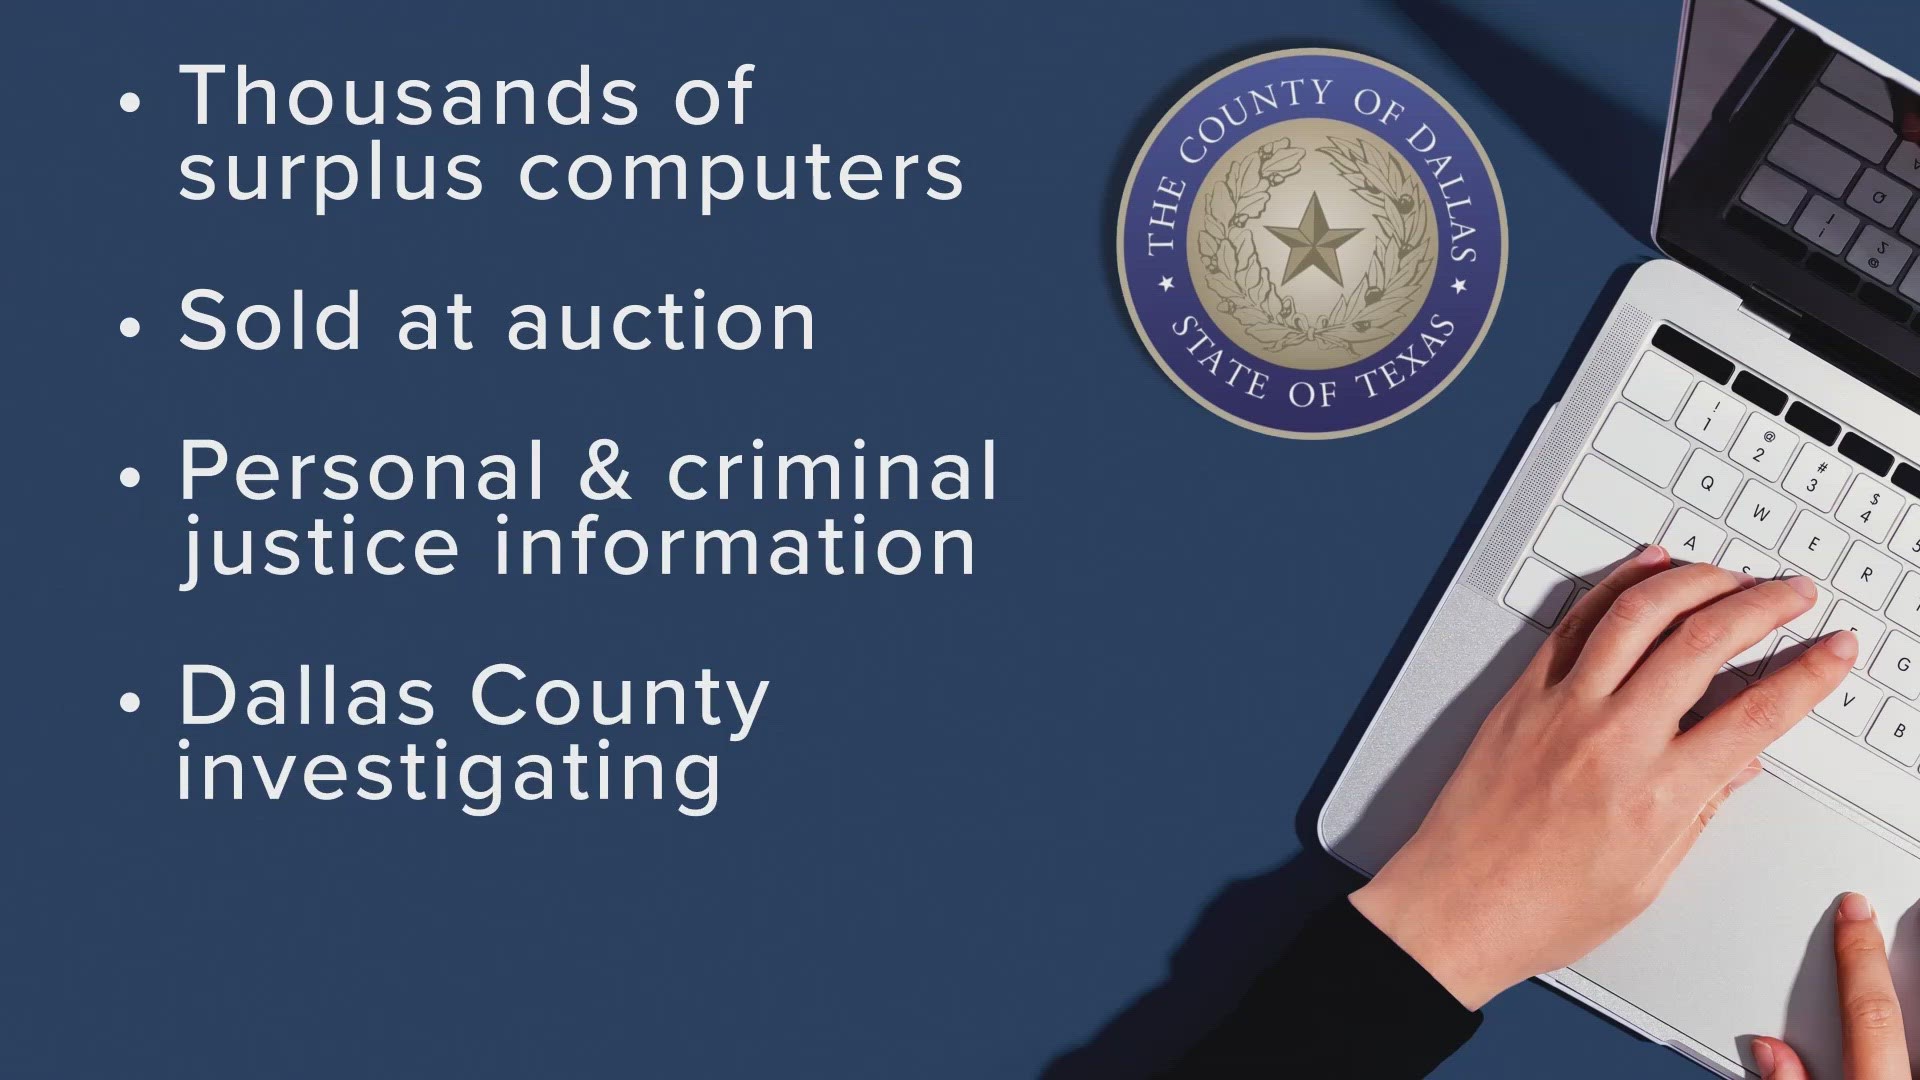 Officials said thousands of surplus computers previously owned by the county and auctioned off contained personal information.